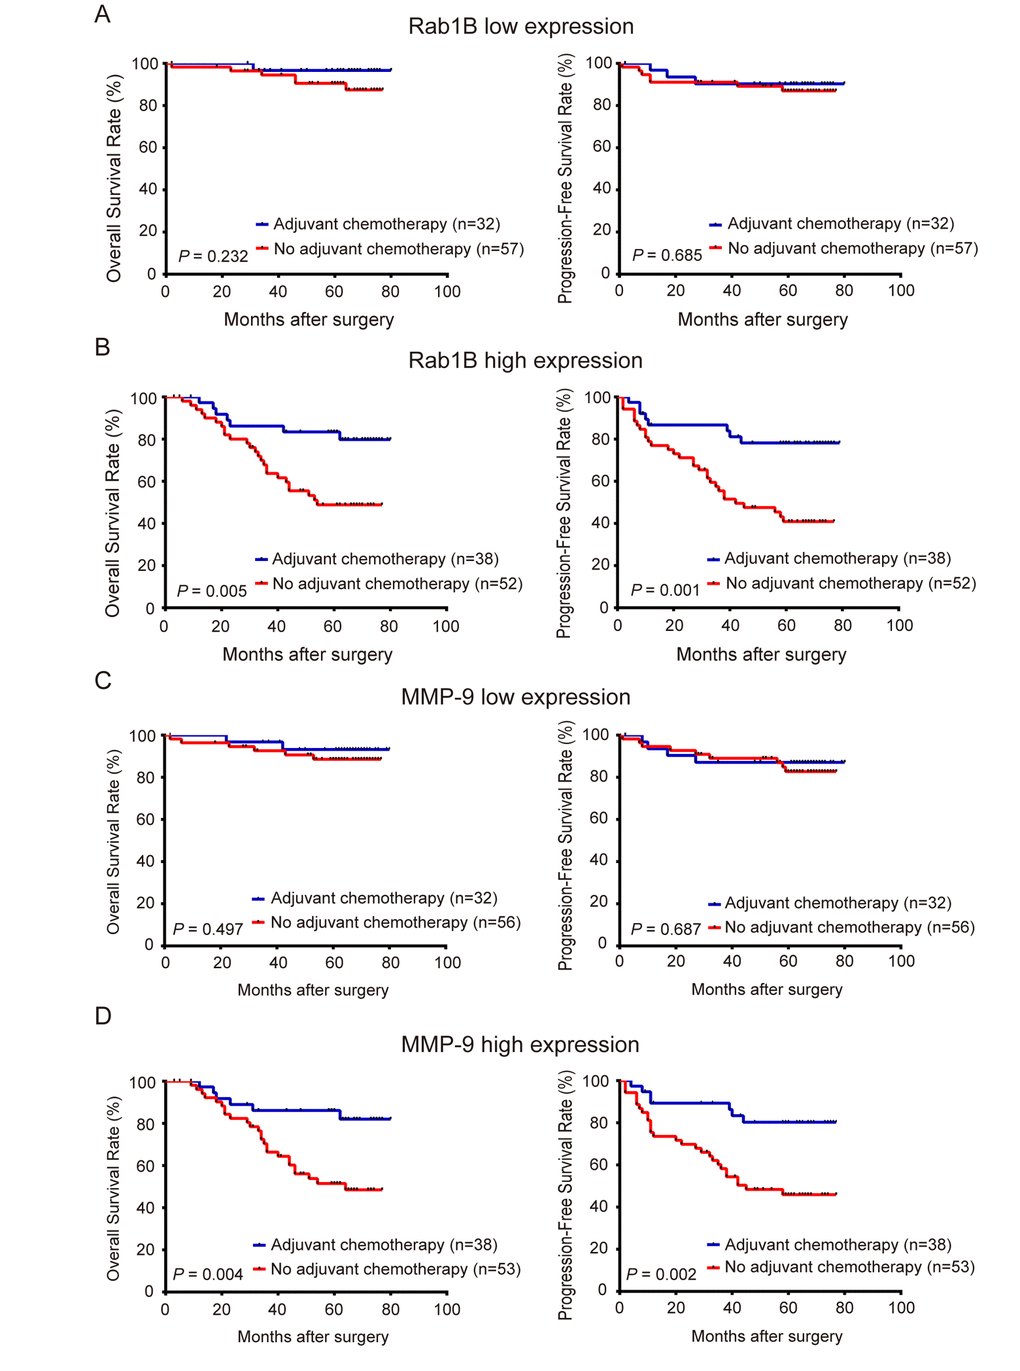 Rab1B and MMP9 protein expression predicts outcome of adjuvant chemotherapy in CRC patients. Patients with CRC were stratified into high- or low-expression group by Rab1B or MMP9 expression. (A) Kaplan-Meier survival and Log-rank test were used to compare OS and PFS of CRC patients with or without adjuvant chemotherapy in low Rab1B expression group. (B) OS and PFS of CRC patients with or without adjuvant chemotherapy in the high Rab1B expression group. (C) OS and PFS of CRC patients with or without adjuvant chemotherapy in the low MMP9 expression group. (D) OS and PFS of patients with or without adjuvant chemotherapy in the high MMP9 expression group.